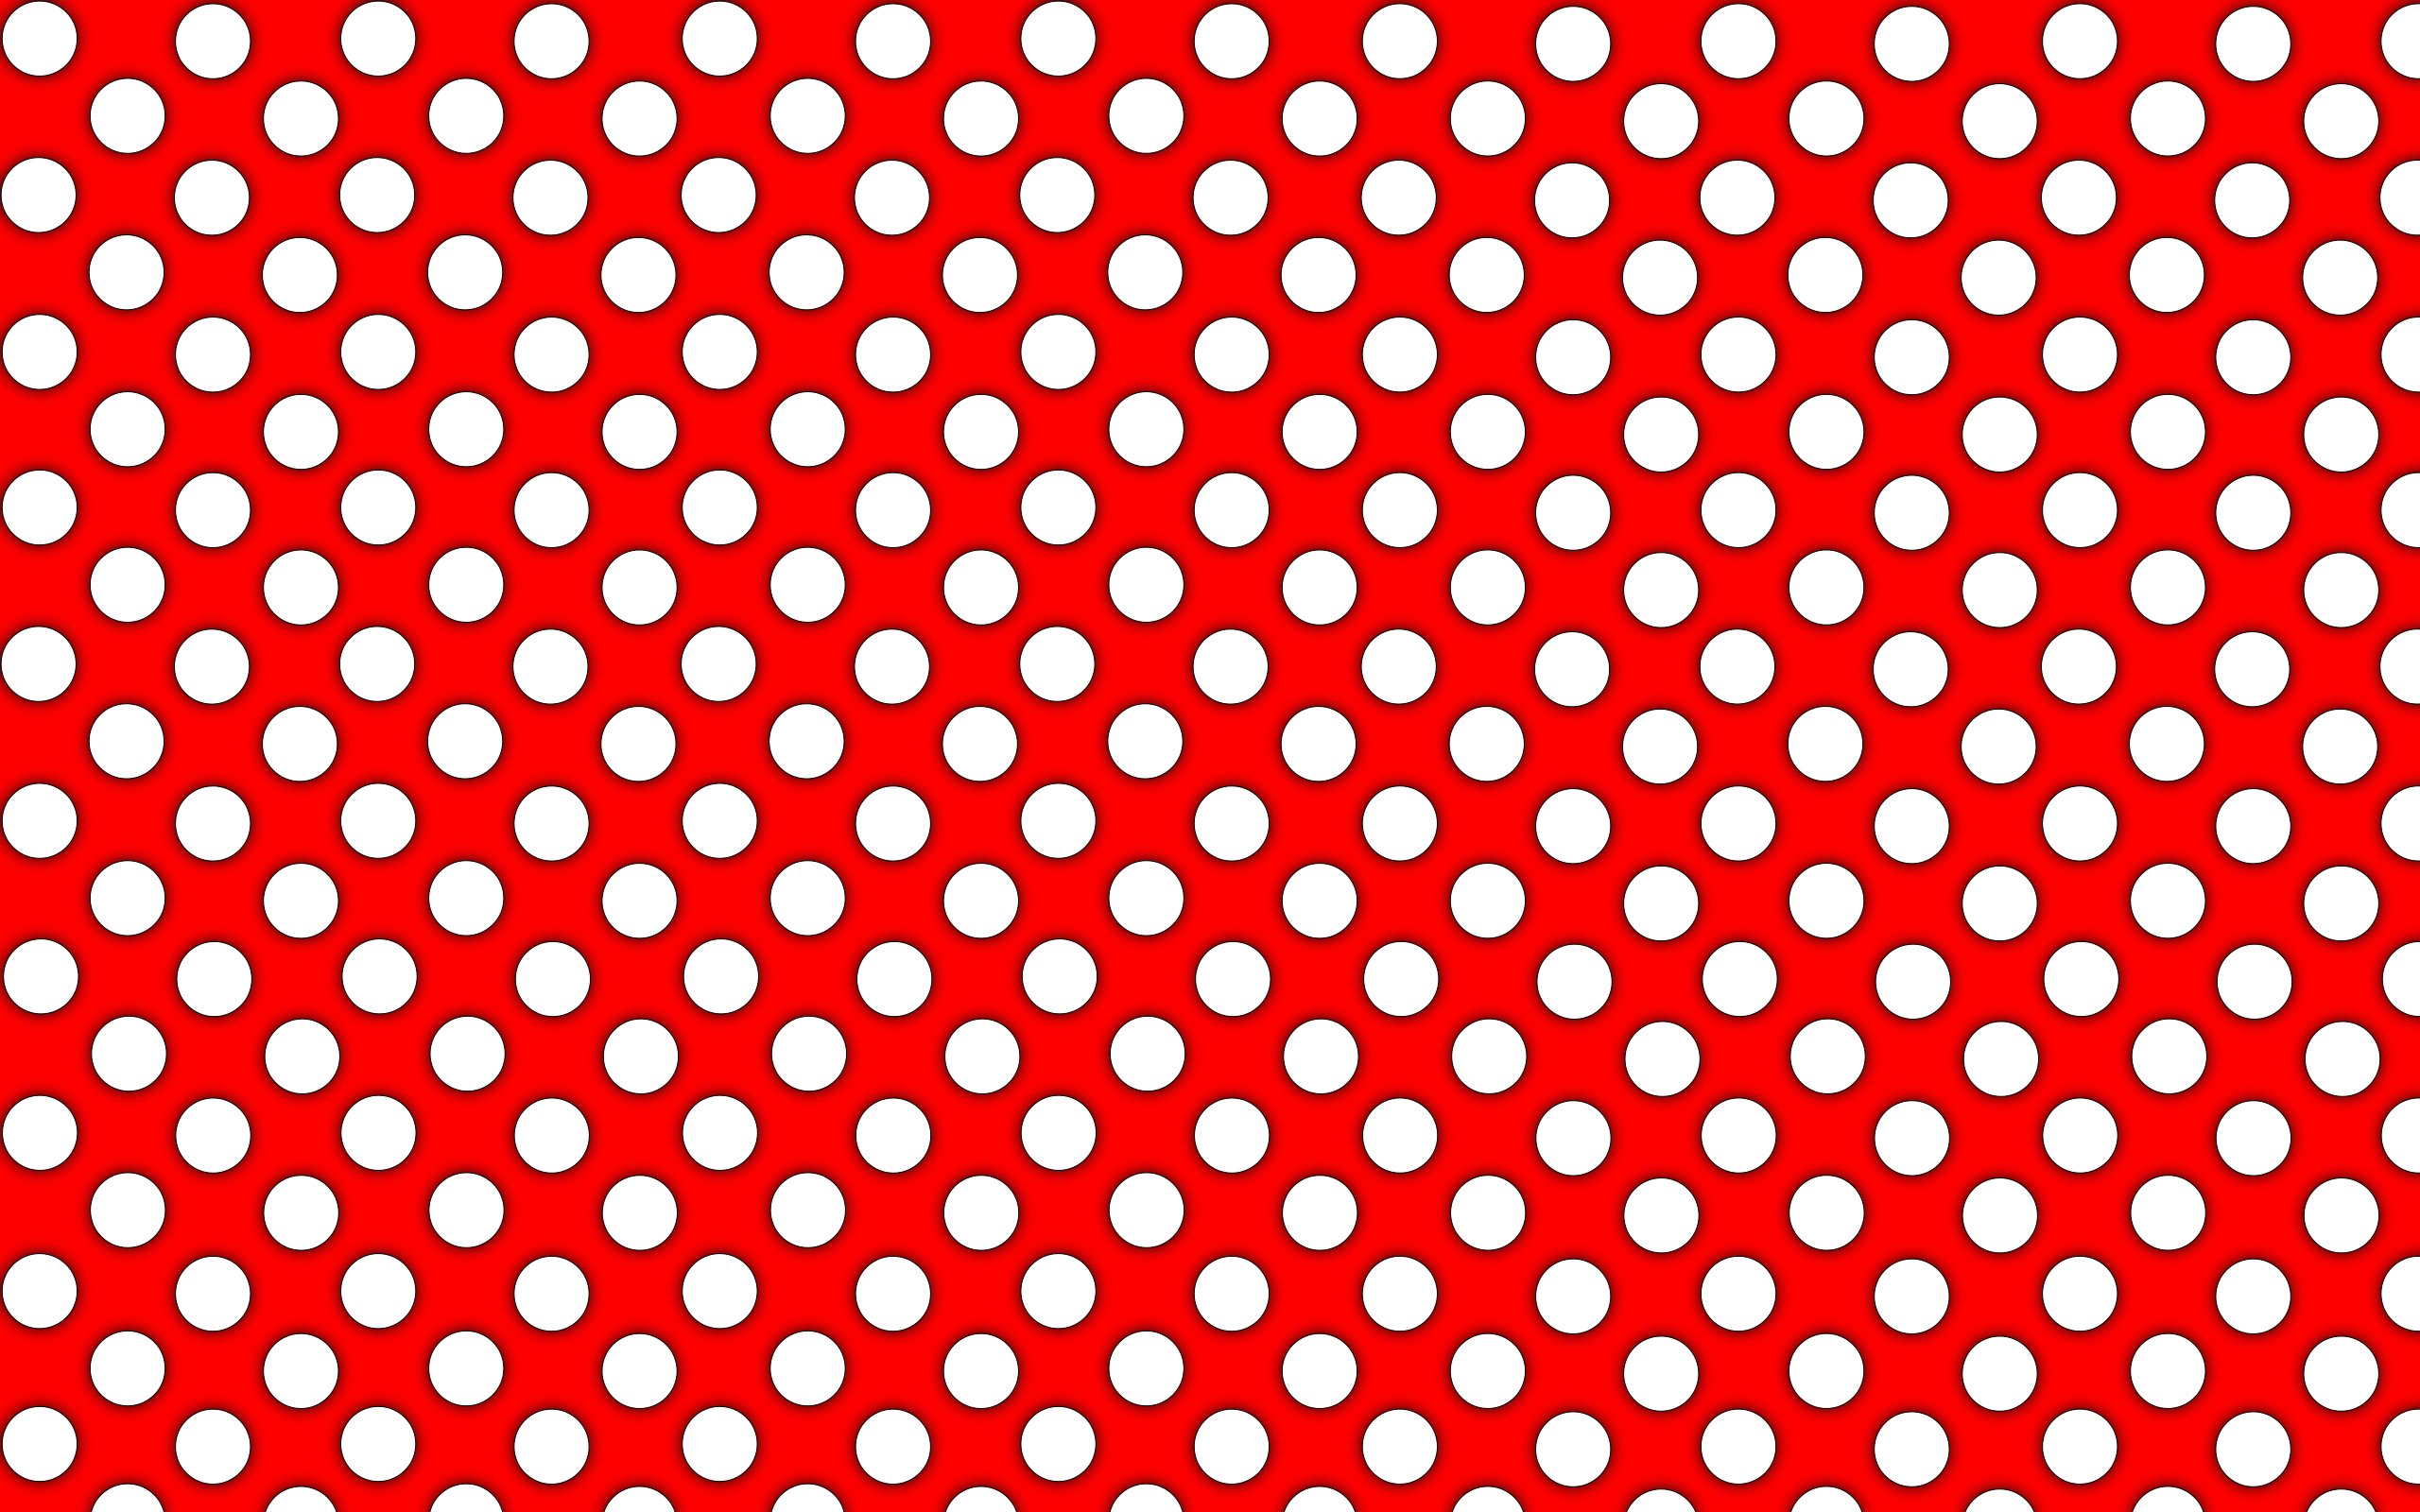 5. Red and White Polka Dot Nails for a Classic Summer Look - wide 3